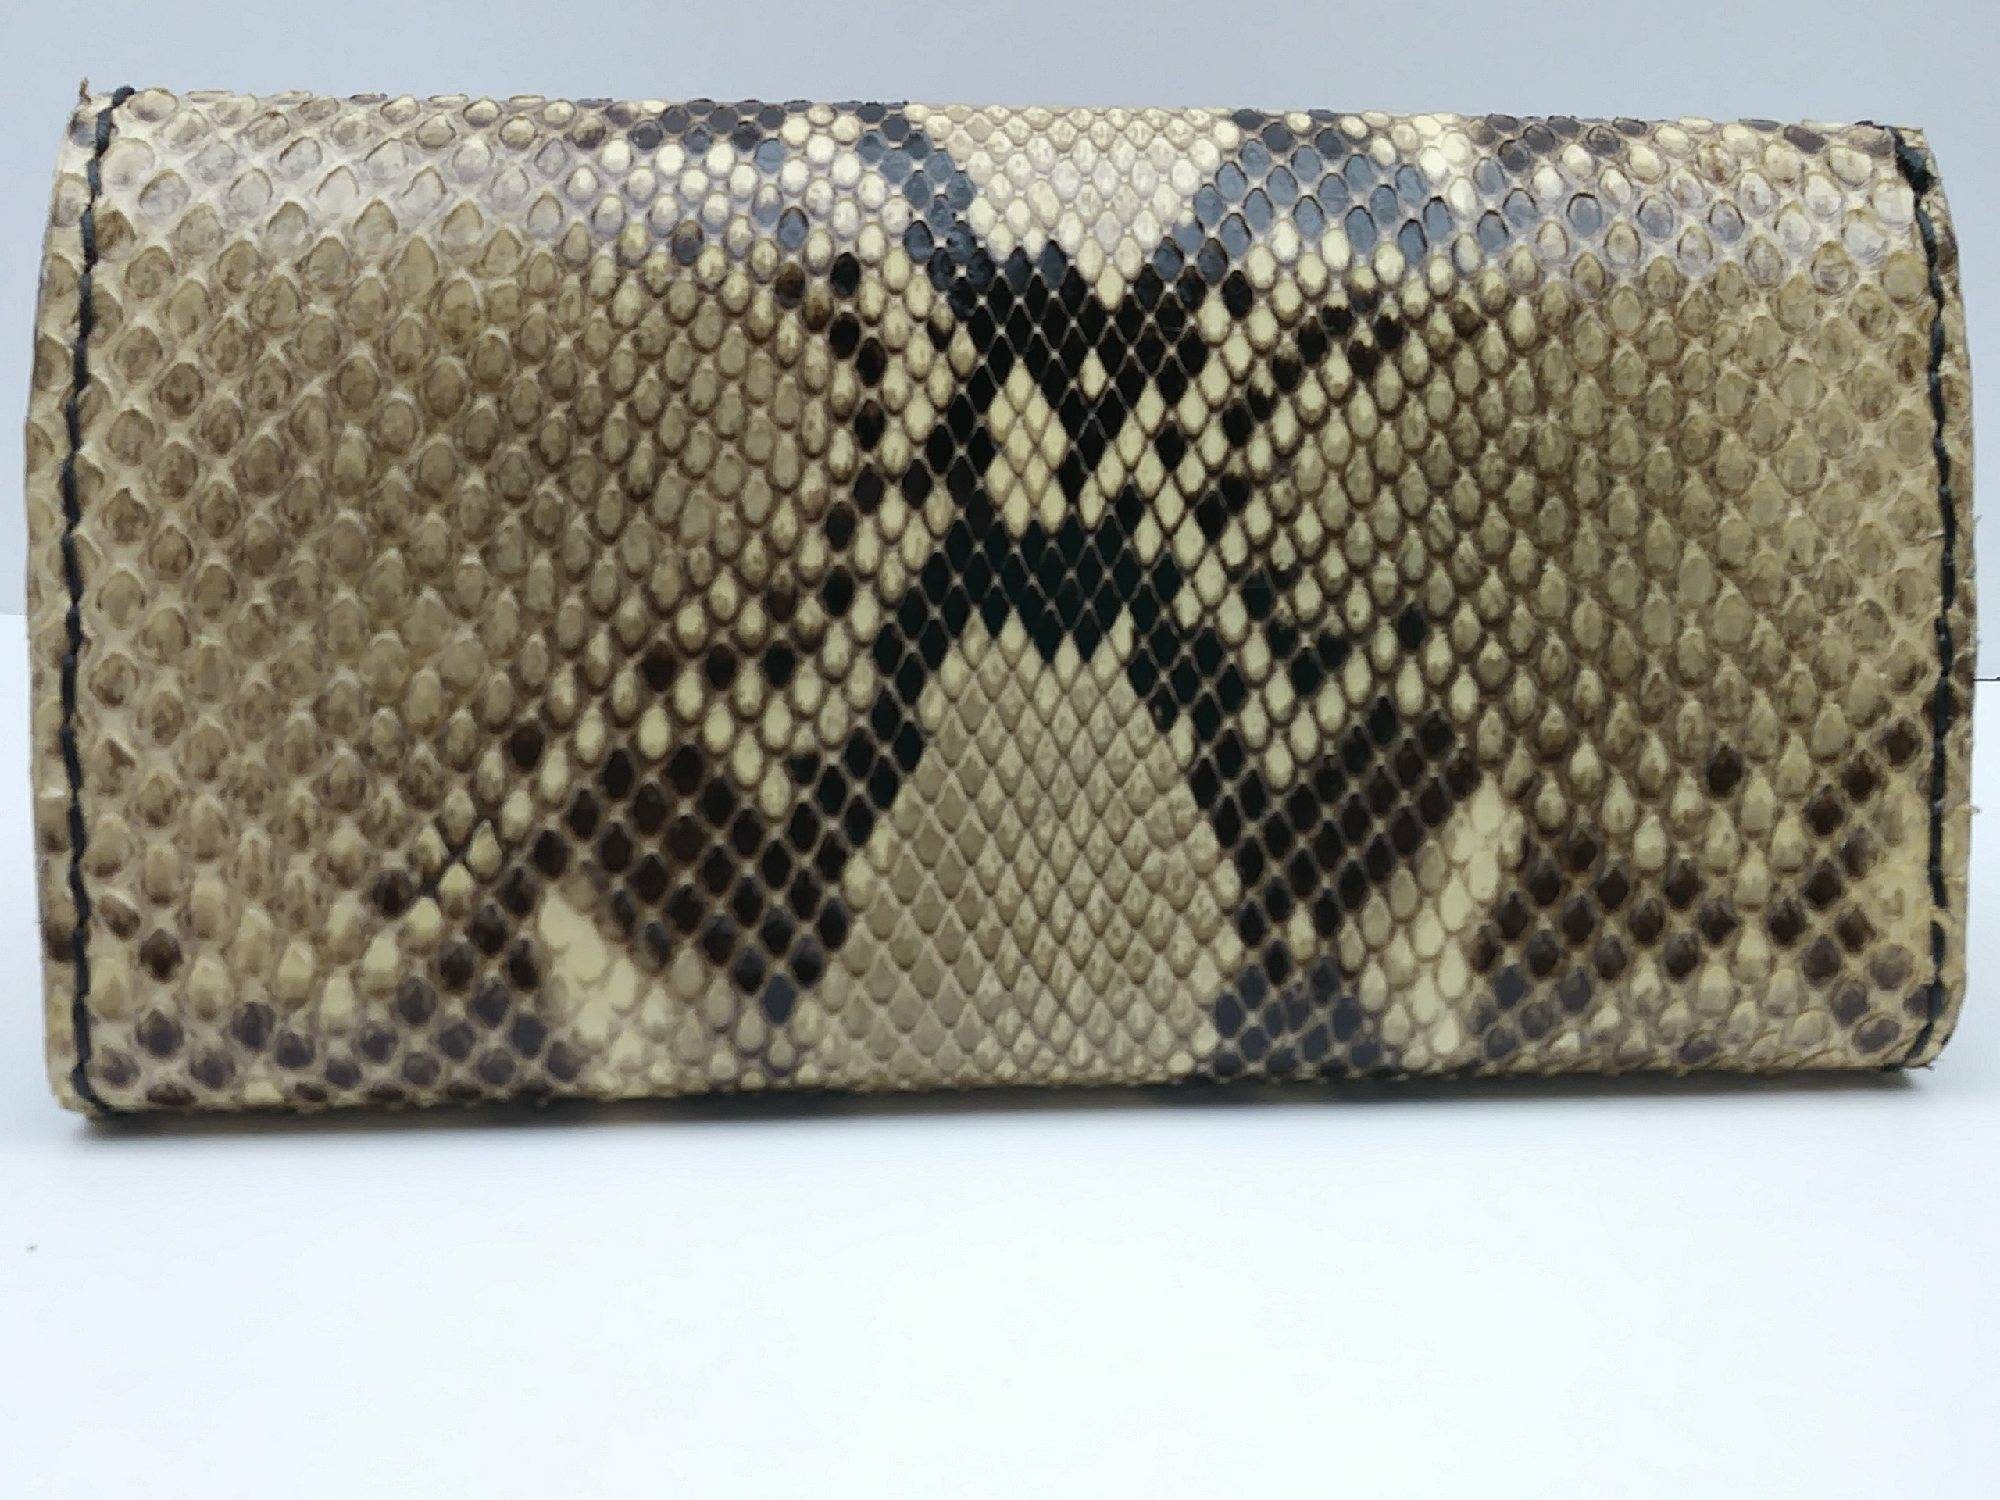 Women's compact wallet in python, hand-painted silver